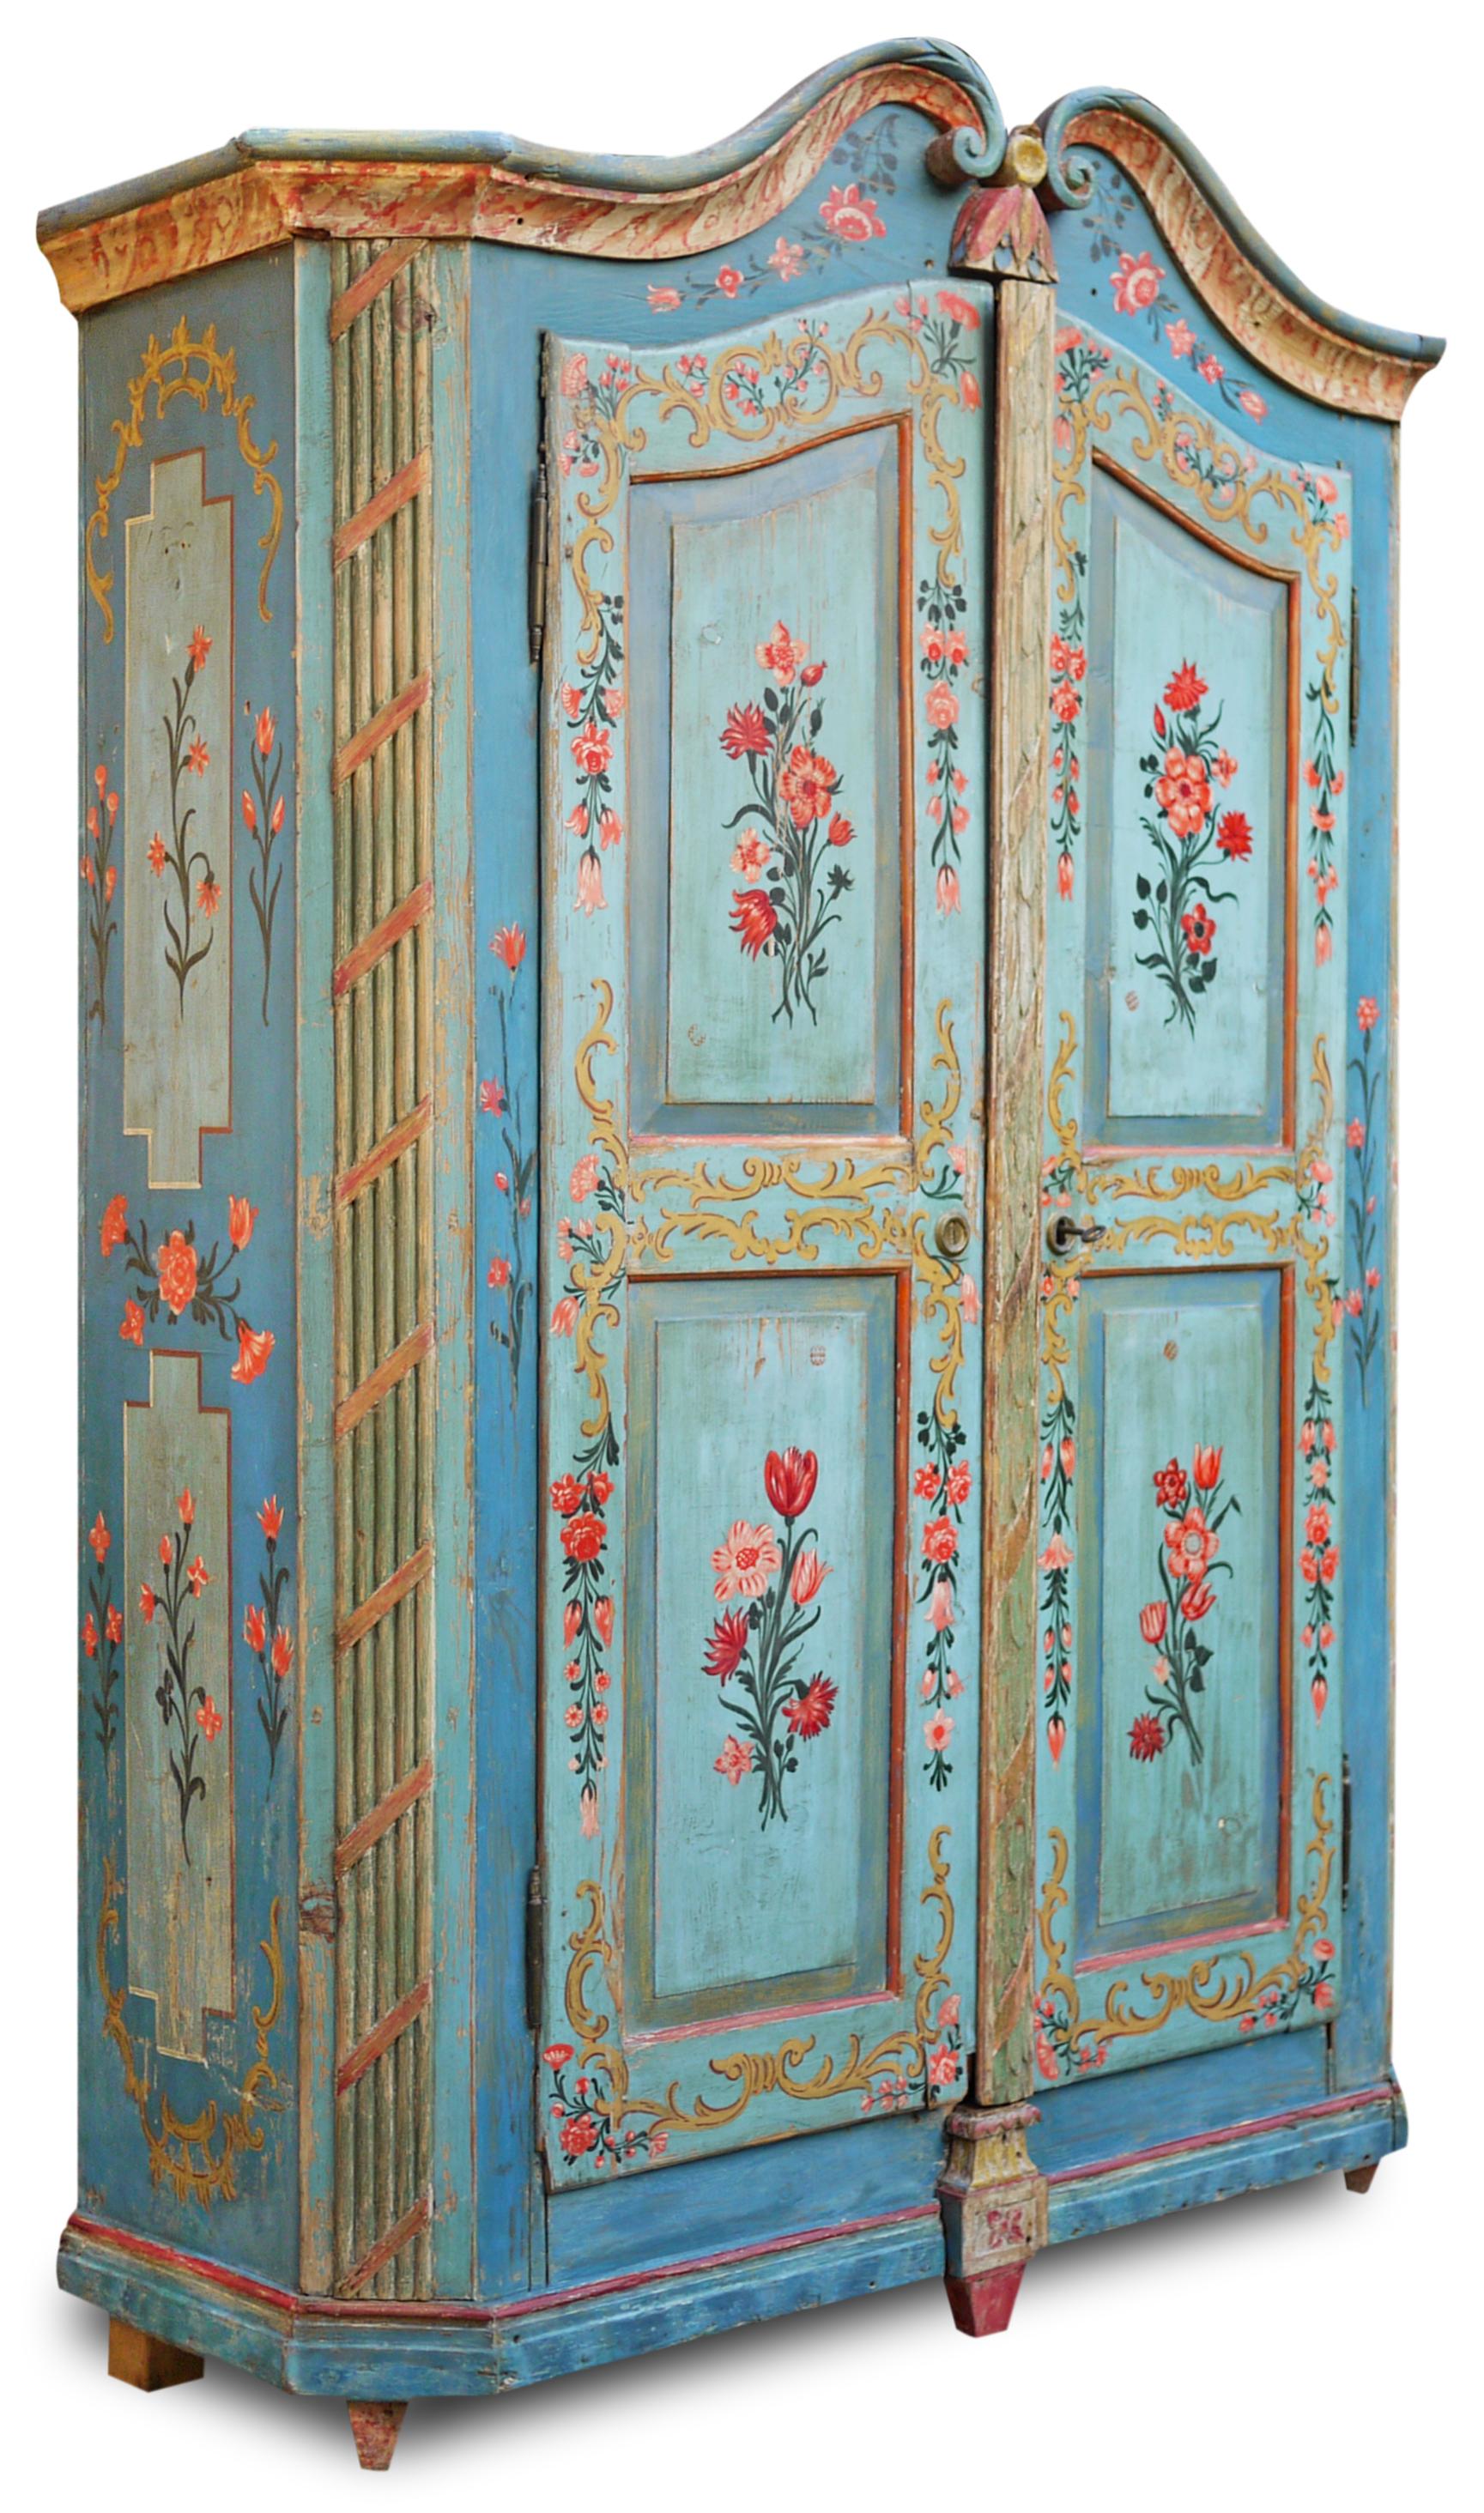 Cabinet, blue Tyrolean floral painted wardrobe - 19th century, Central Europe

Measures: H. 200 cm – L. 125 cm (138 cm to the frames) – P. 44 cm (55 cm to the frames)

Rich Tyrolean wardrobe with two doors, entirely painted in light blue.

On